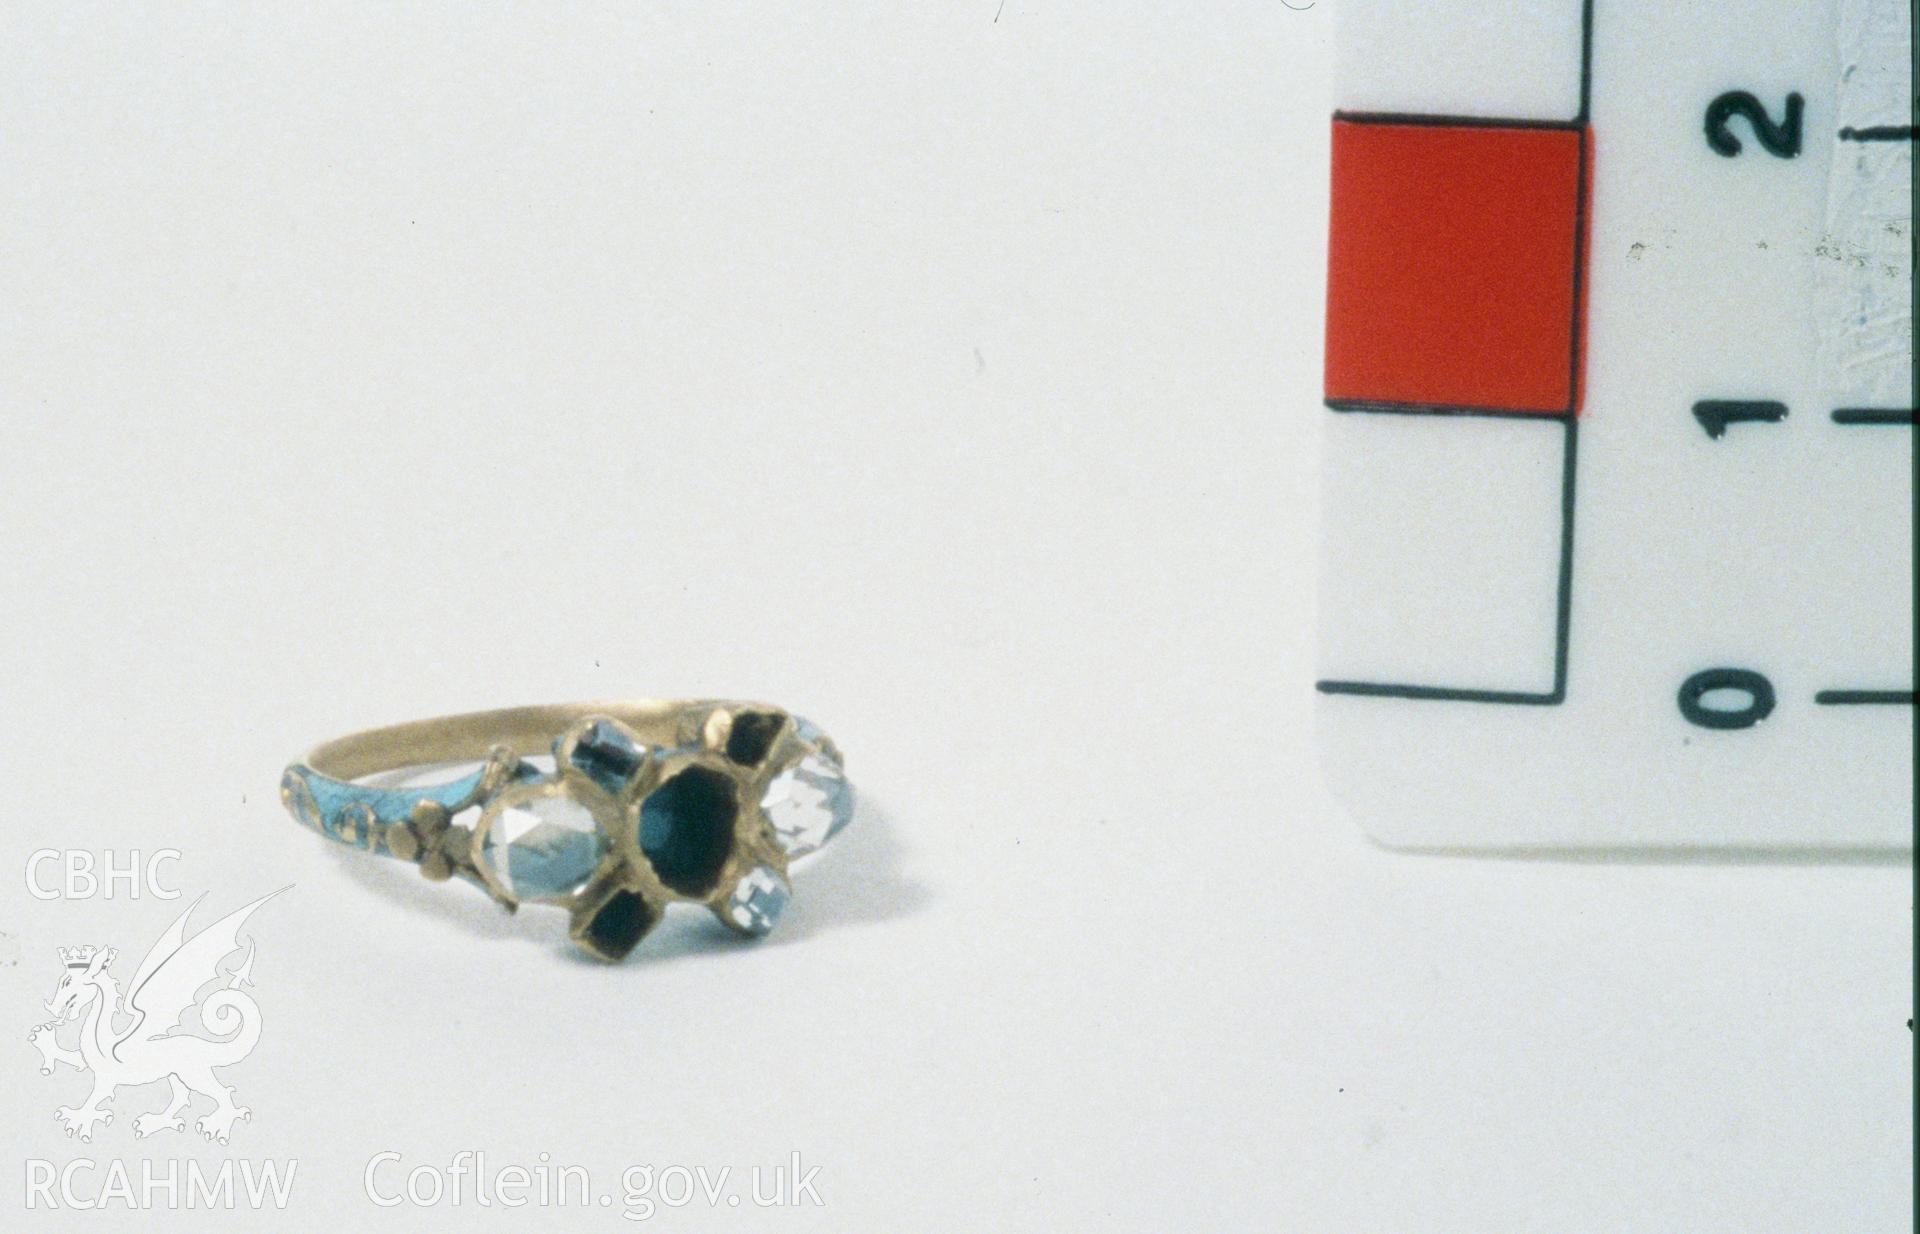 Colour slide showing find, a gold finger ring, from a survey of the Mary designated shipwreck, courtesy of National Museums, Liverpool (Merseyside Maritime Museum)